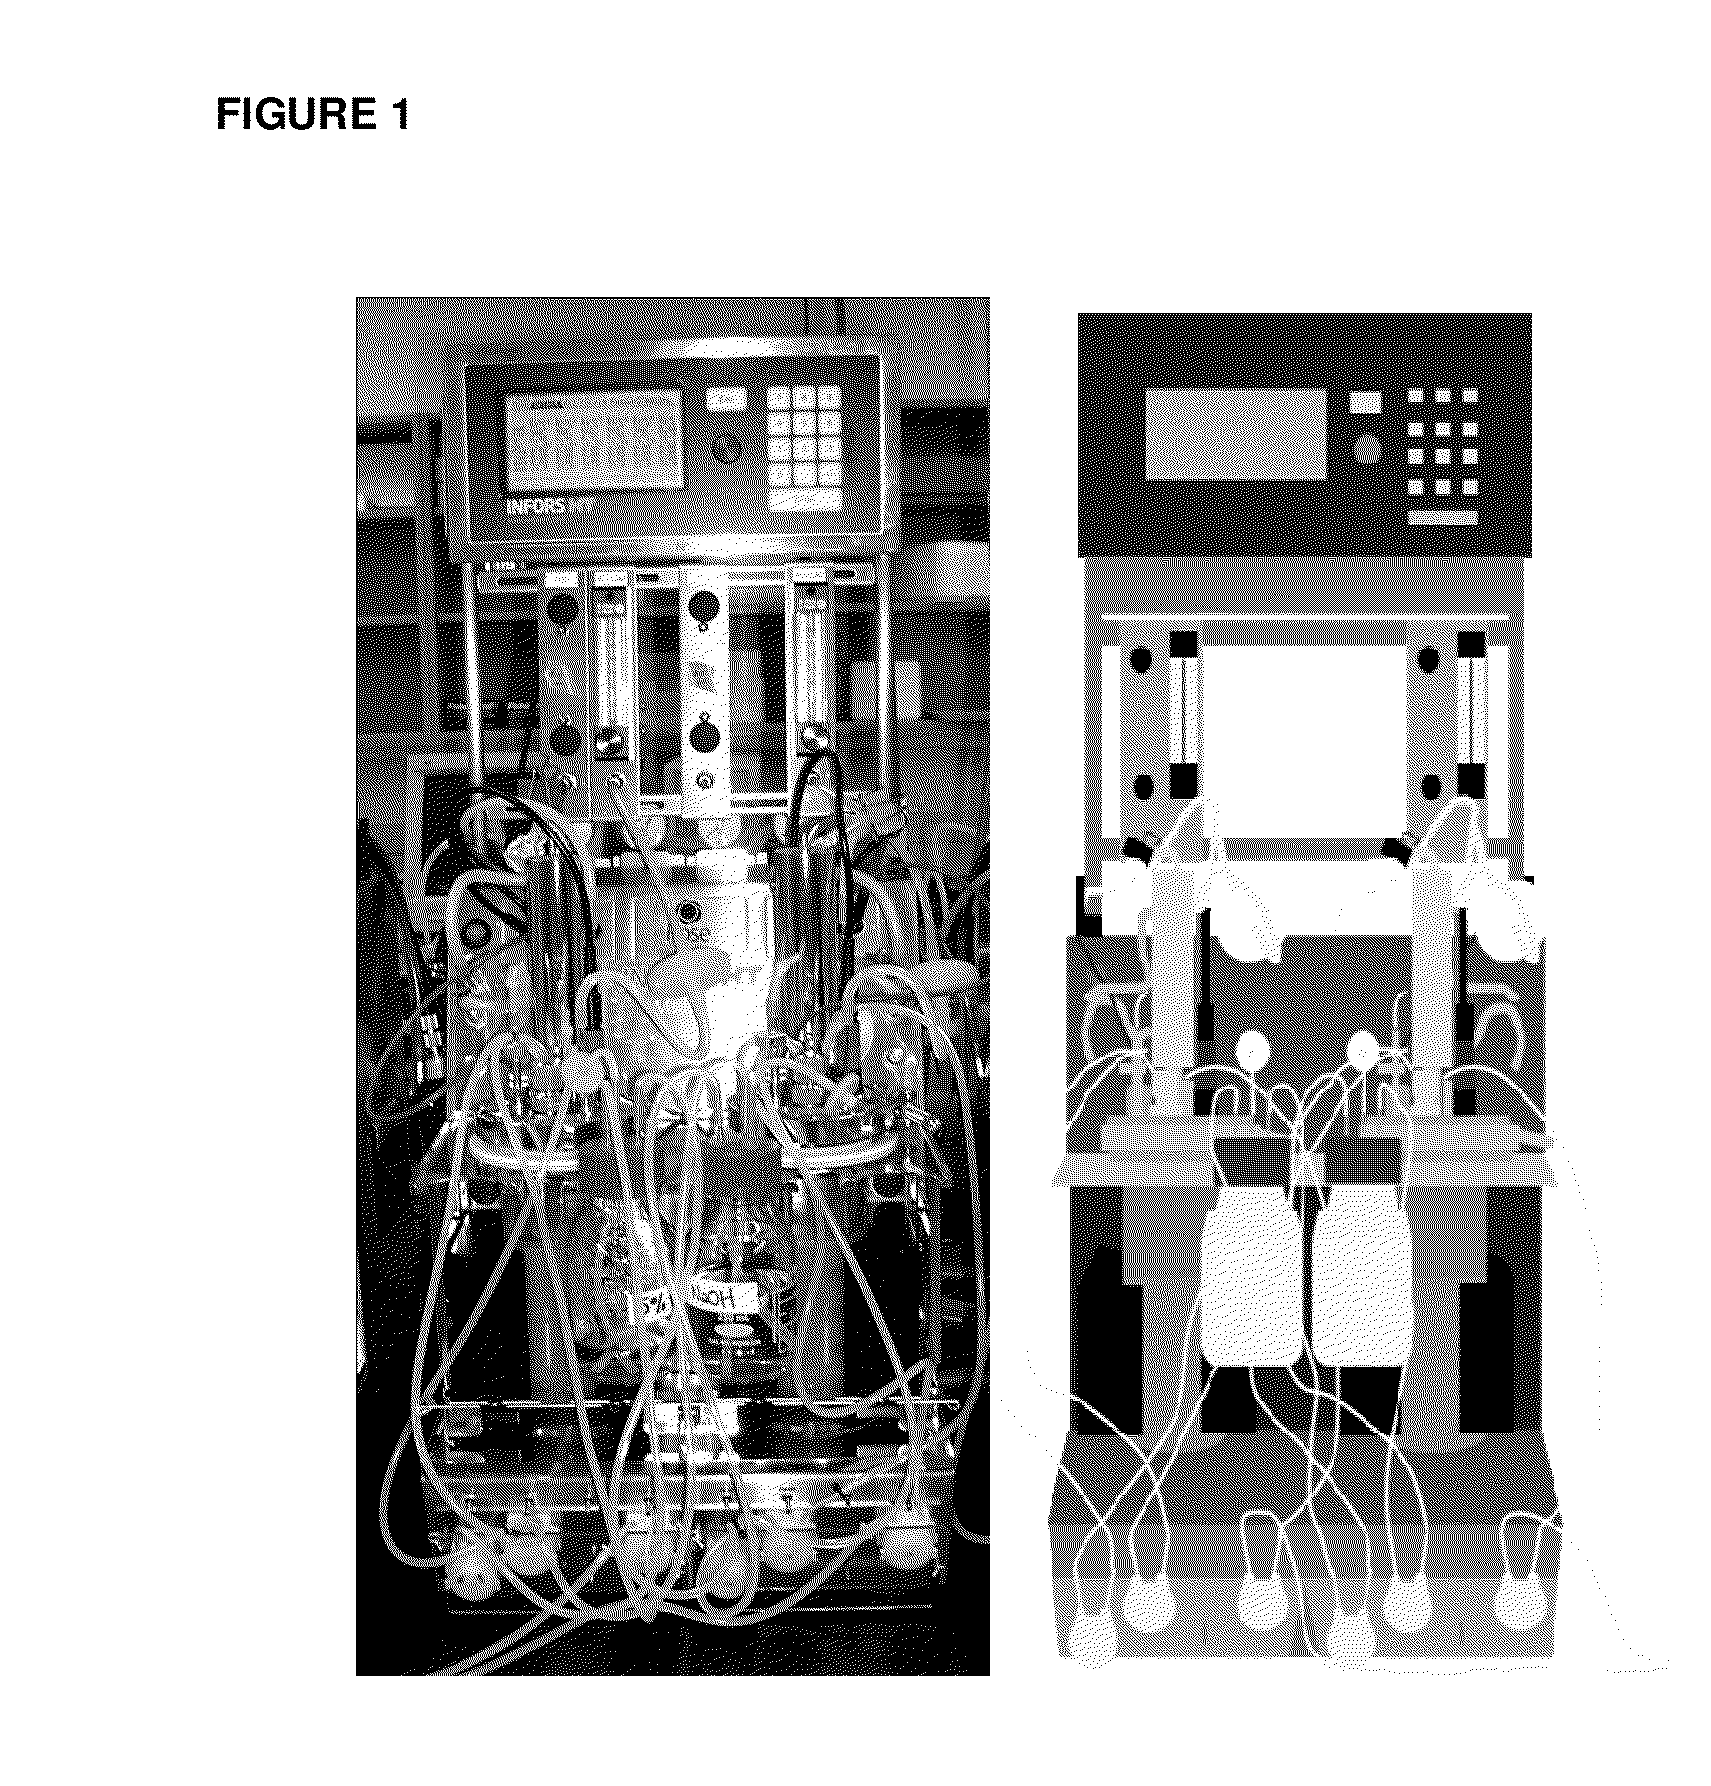 Method for treatment of disorders of the gastrointestinal system